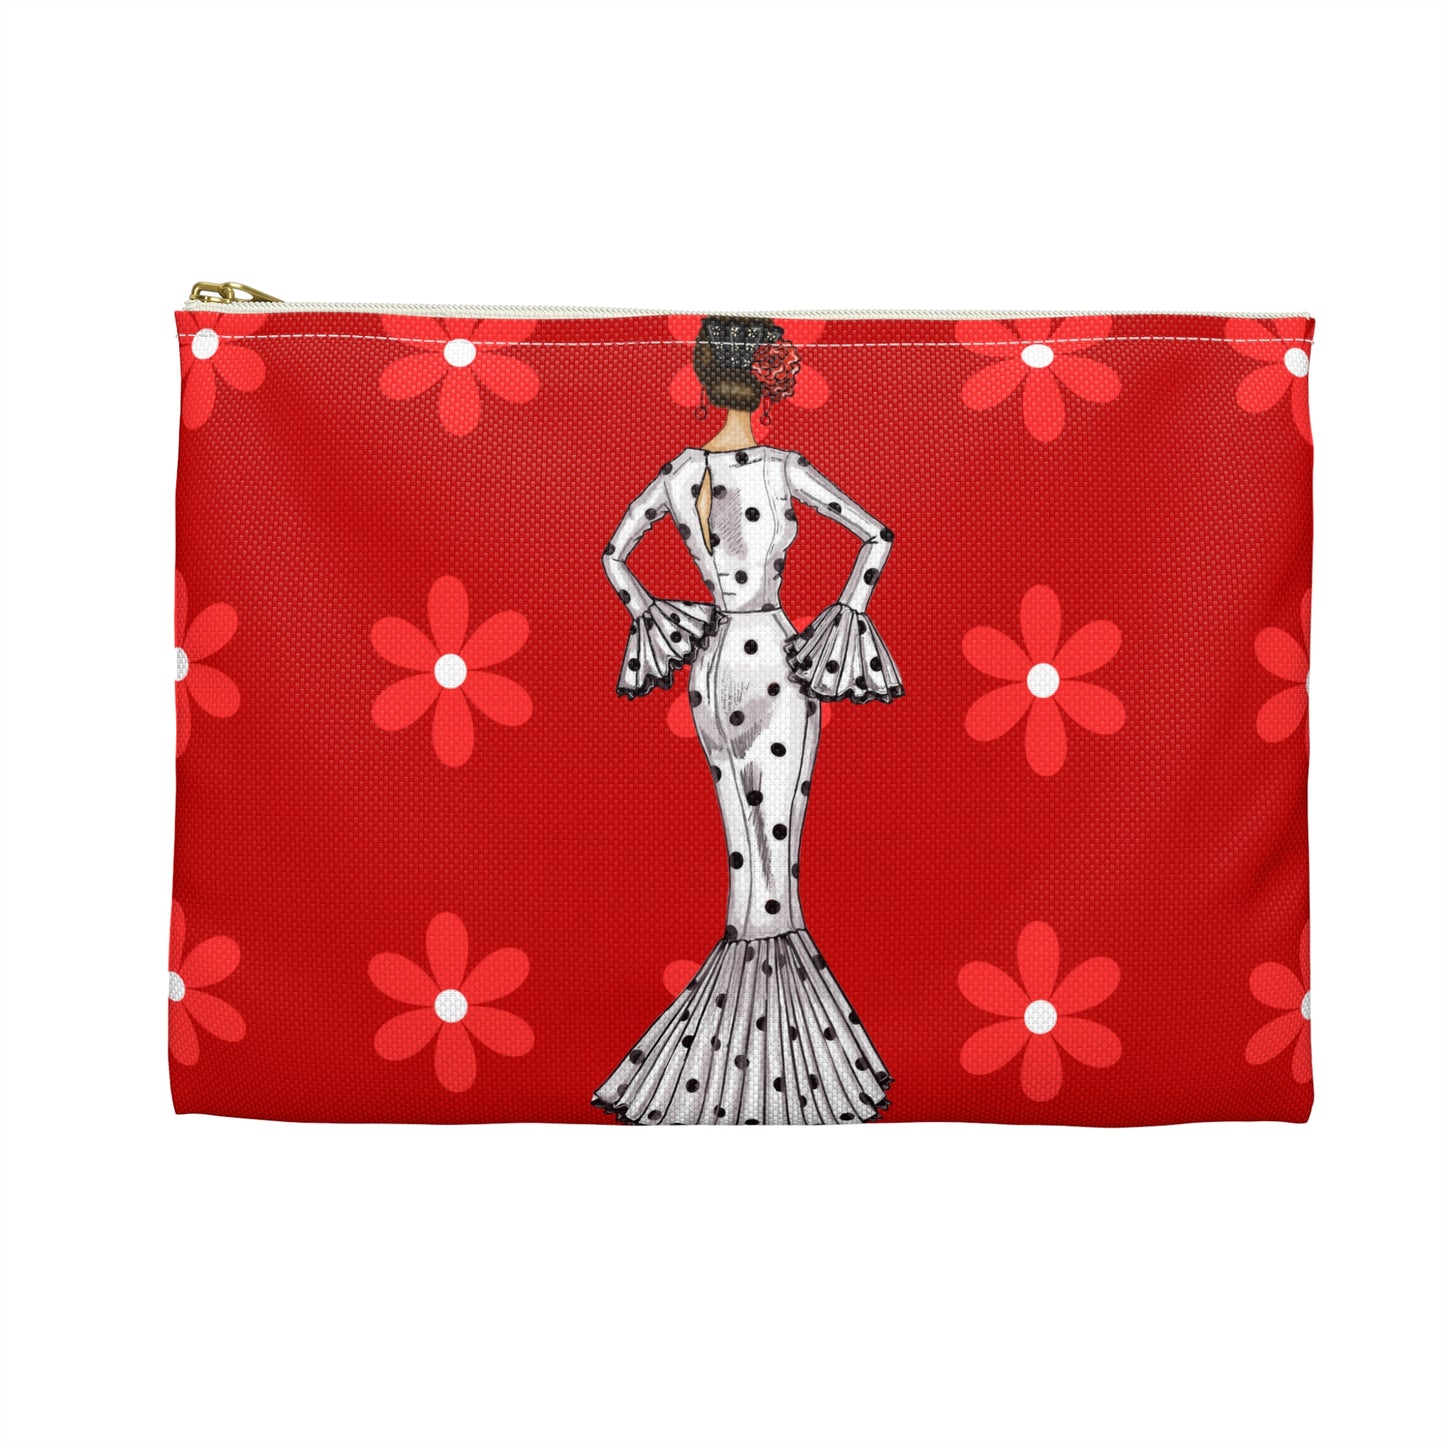 a red purse with a lady in a polka dot dress